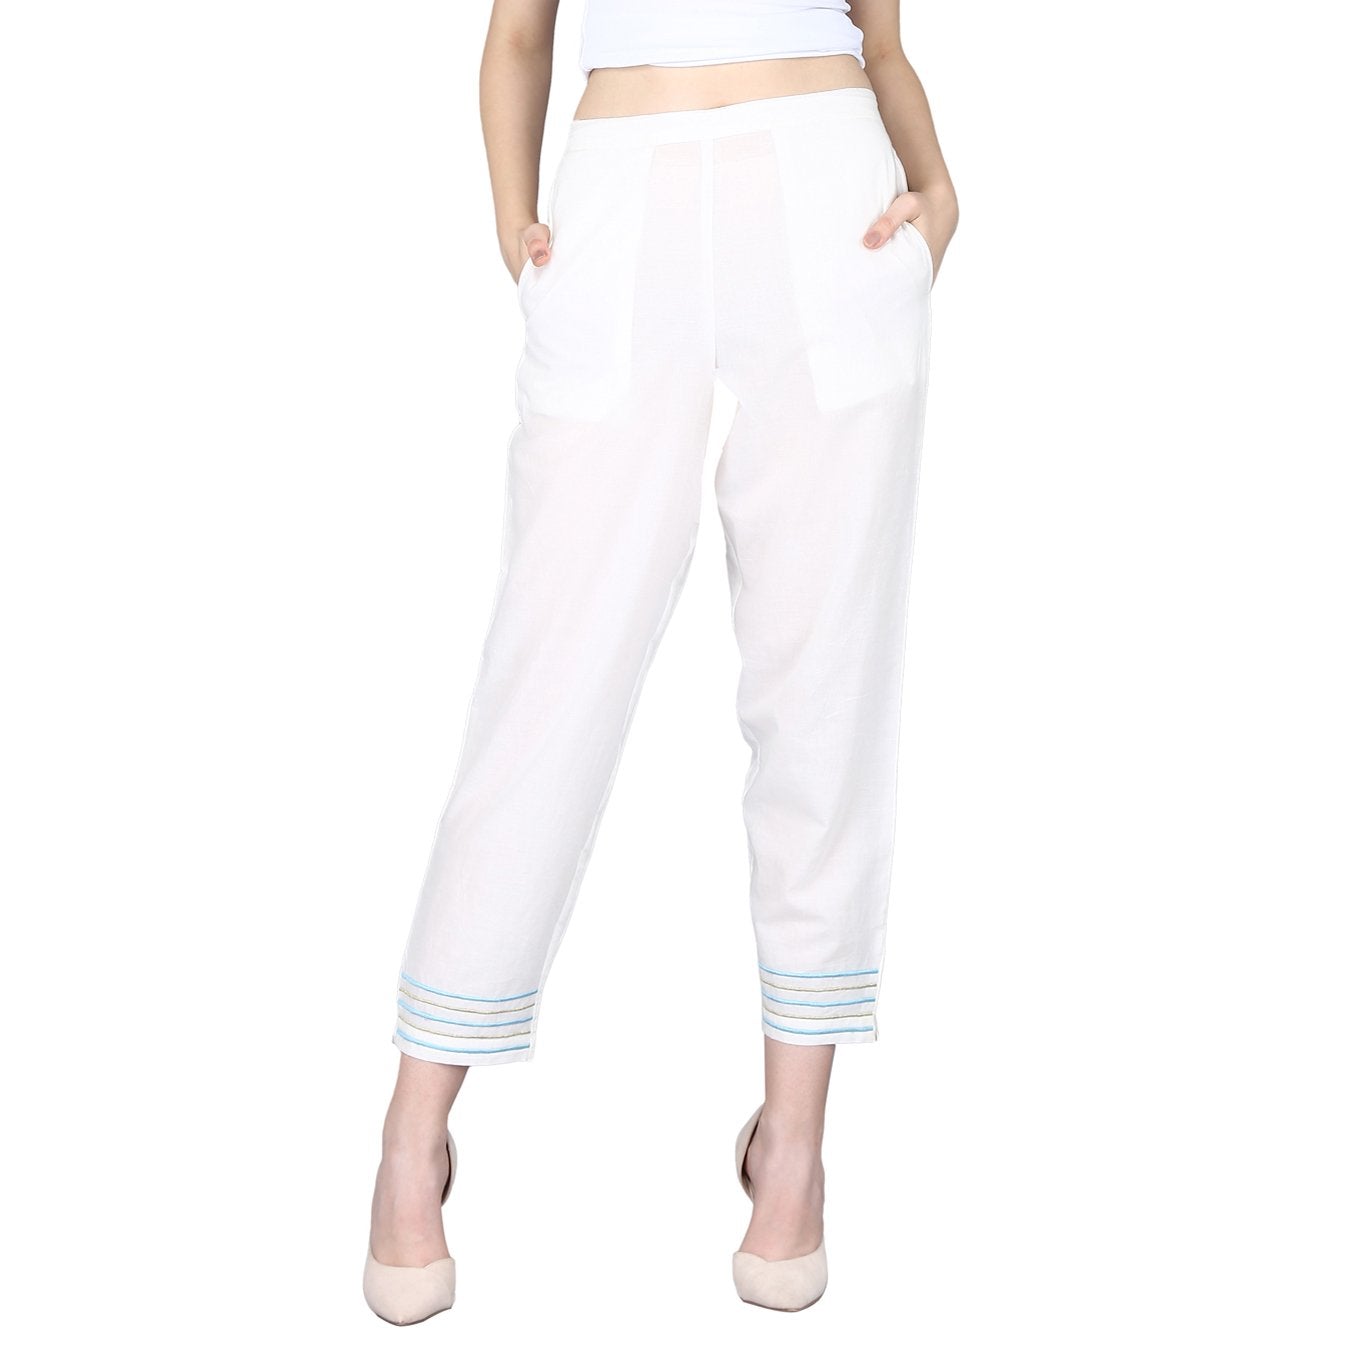 Women's Pure Cotton Embroidery Regular Fit Trouser Pants - Maaesa